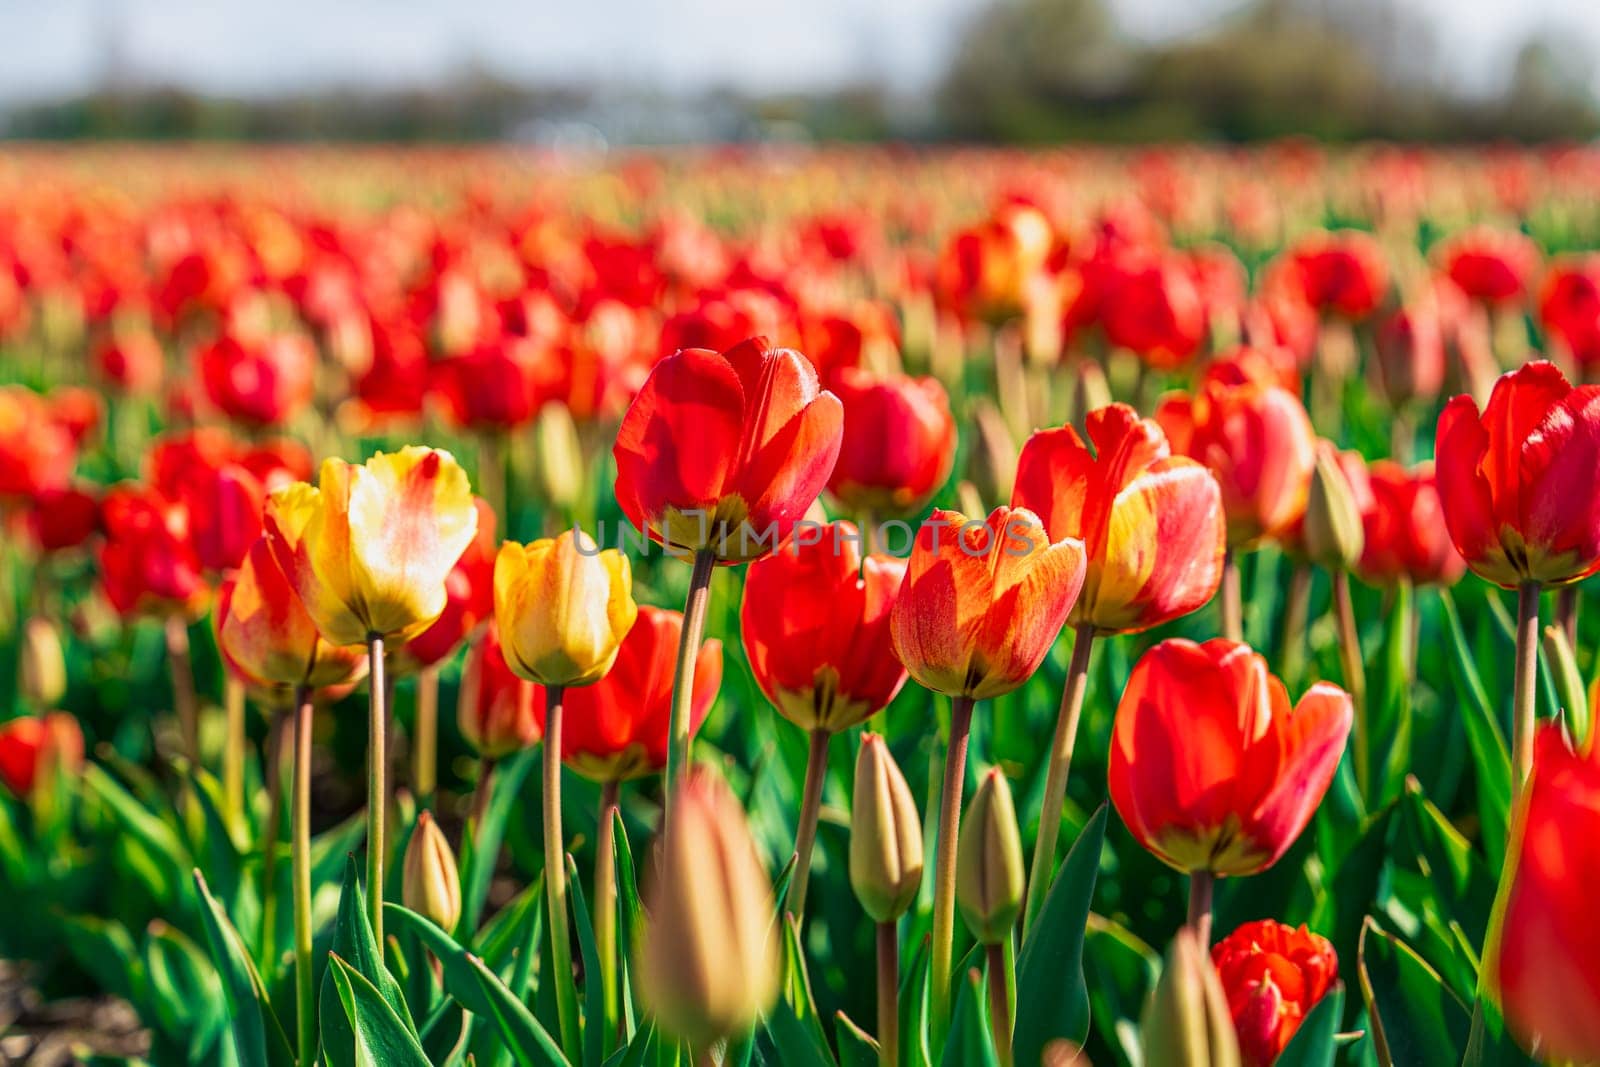 A stunning display of red and yellow tulips in a picturesque field in the Netherlands during spring, highlighting the vibrant colors and natural beauty of the landscape.